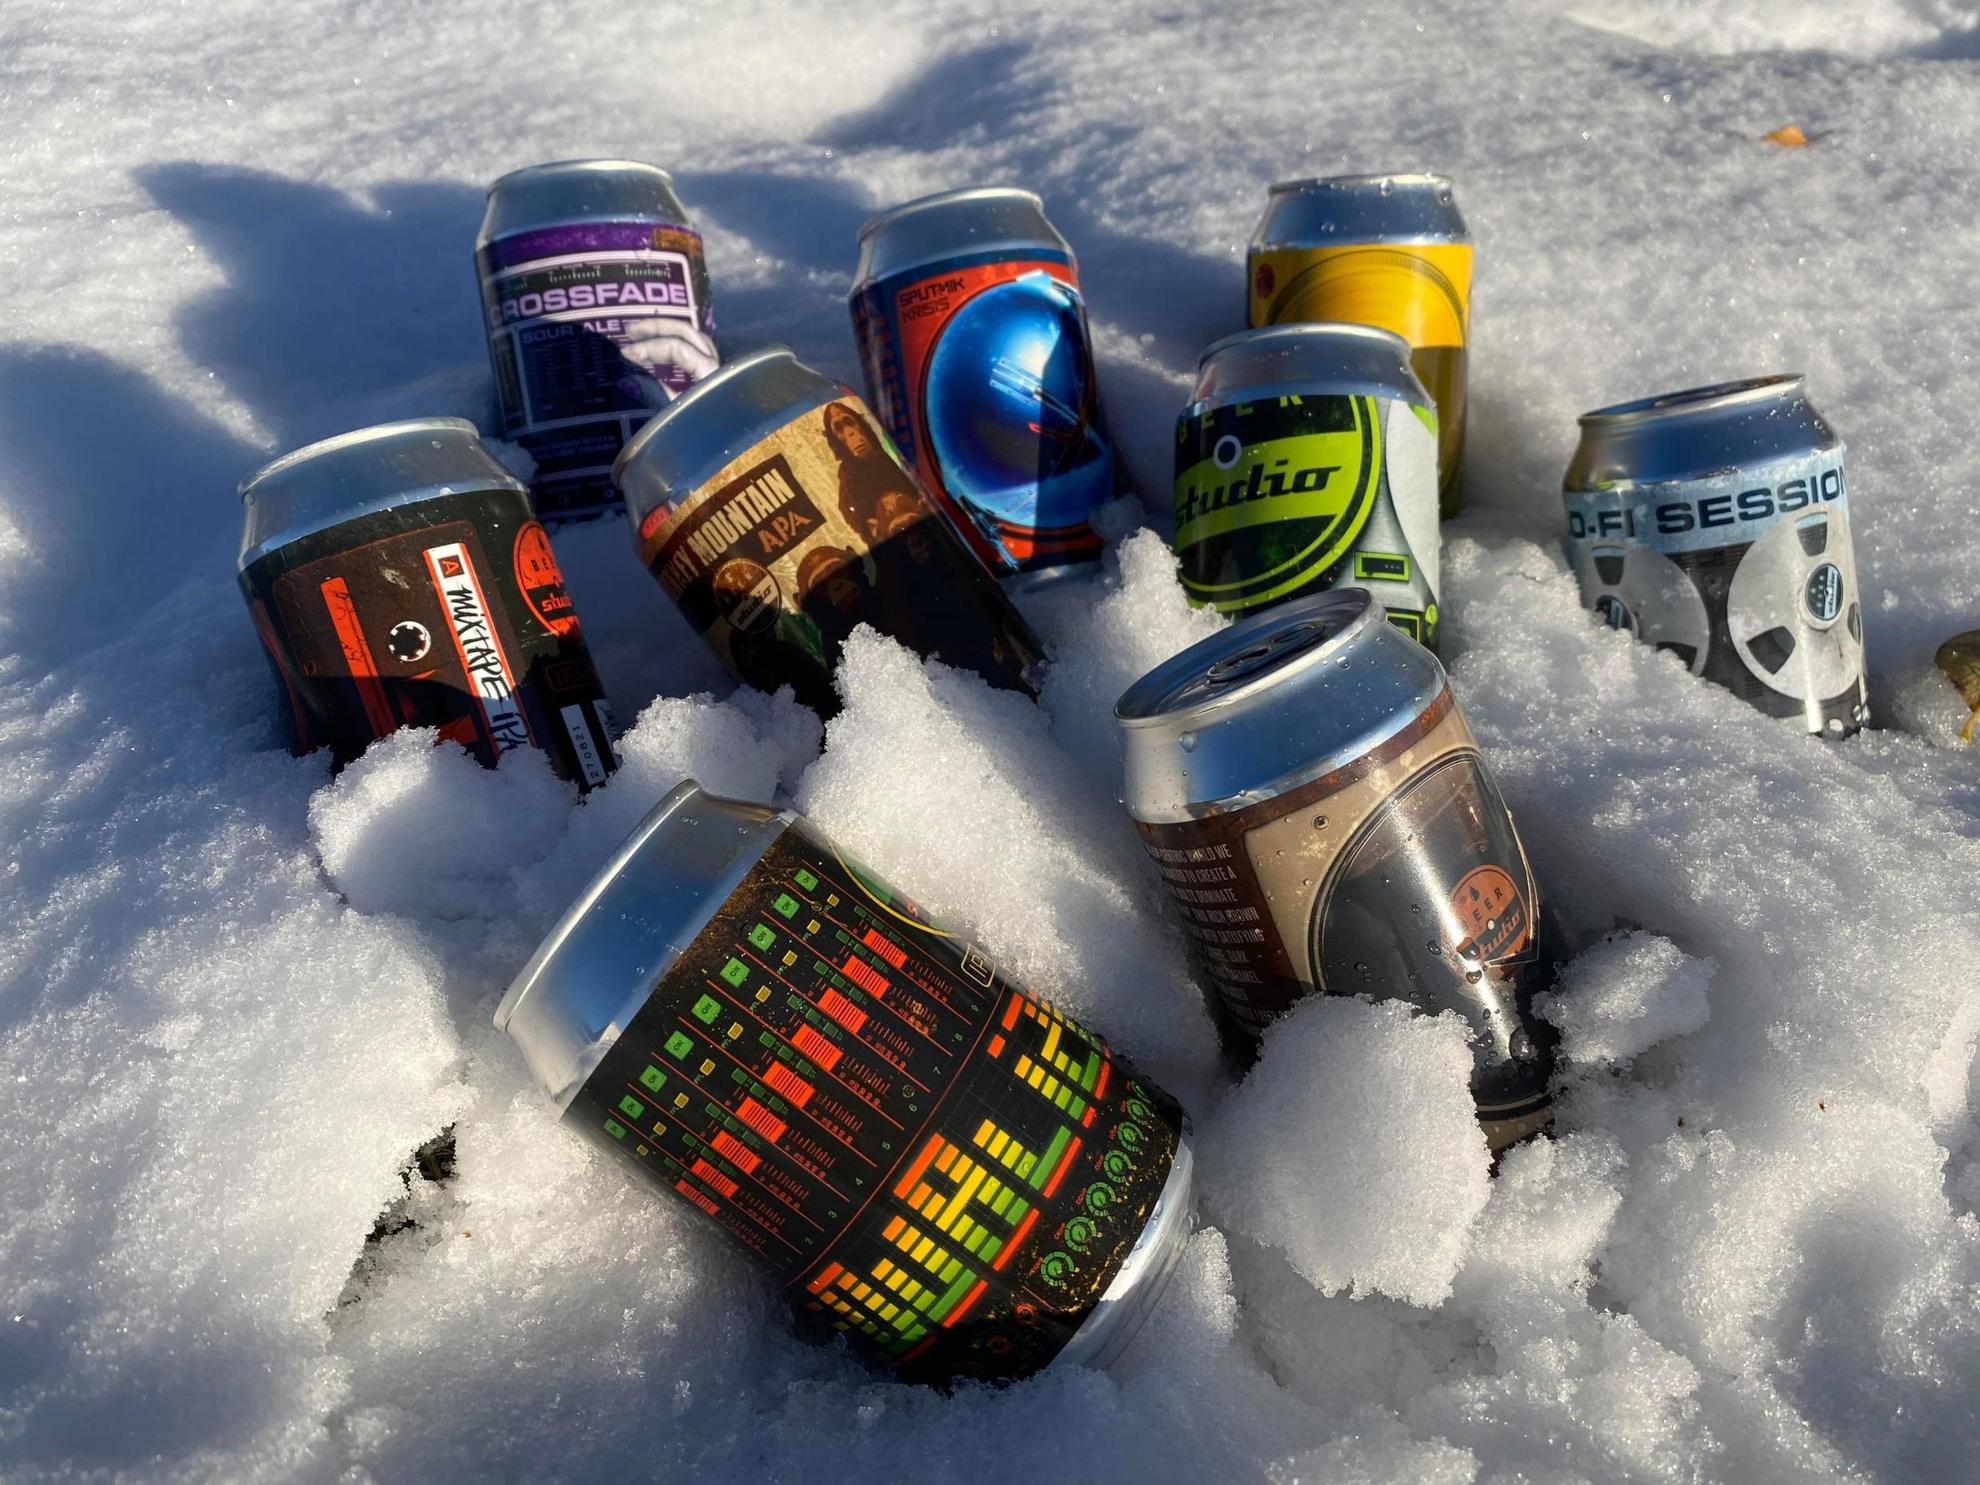 A selection of beers being cooled down in the snow.